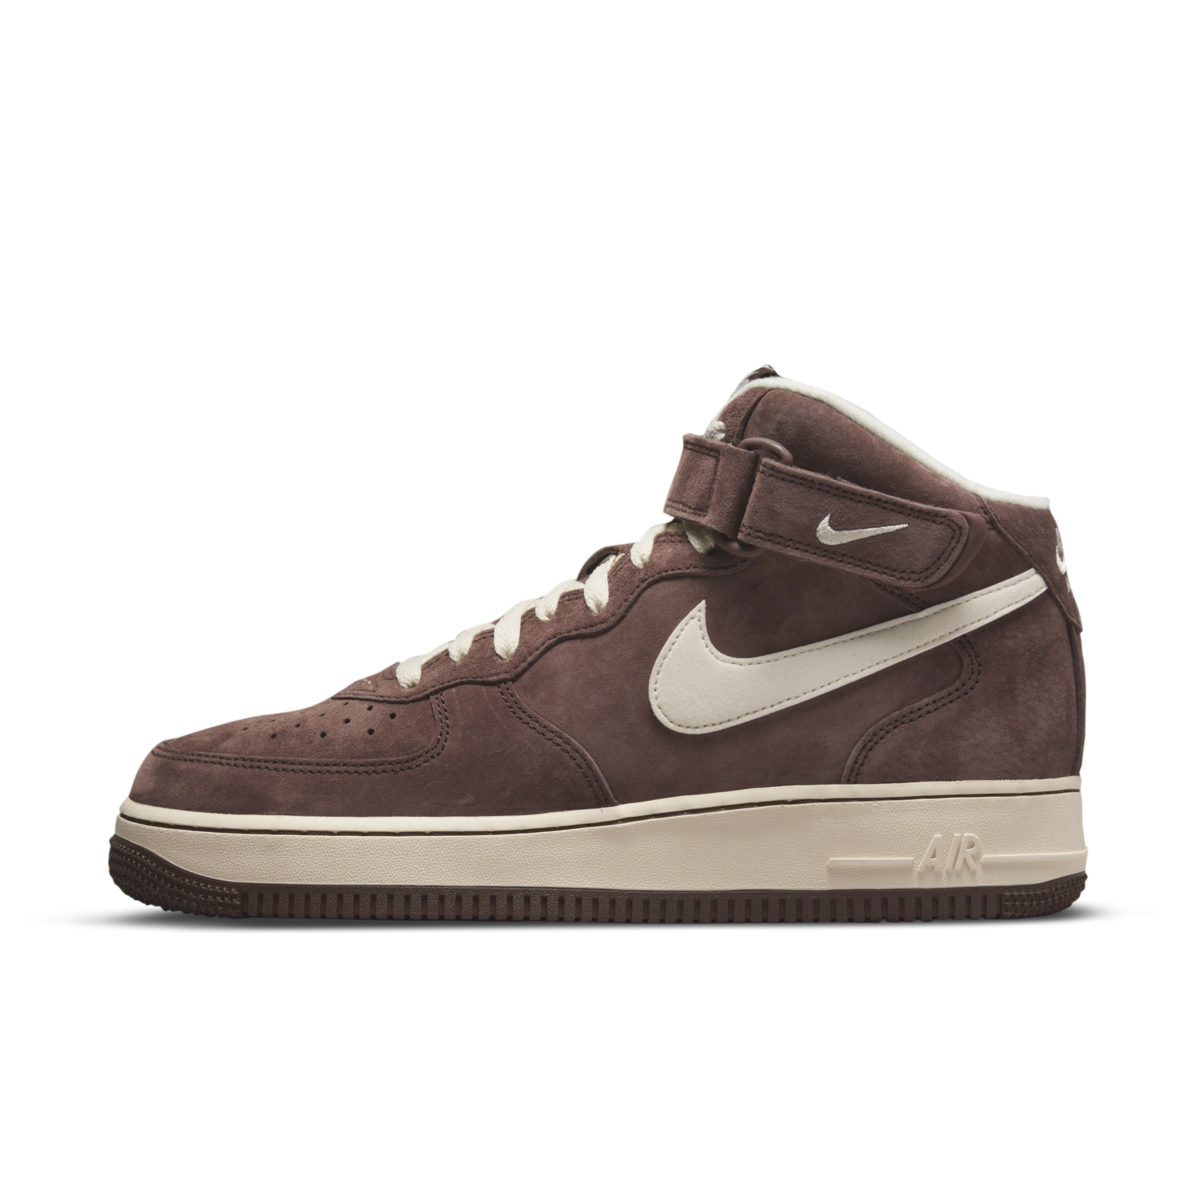 Nike Air Force 1 Mid 07 QS 'Chocolate' Hottest Sneaker